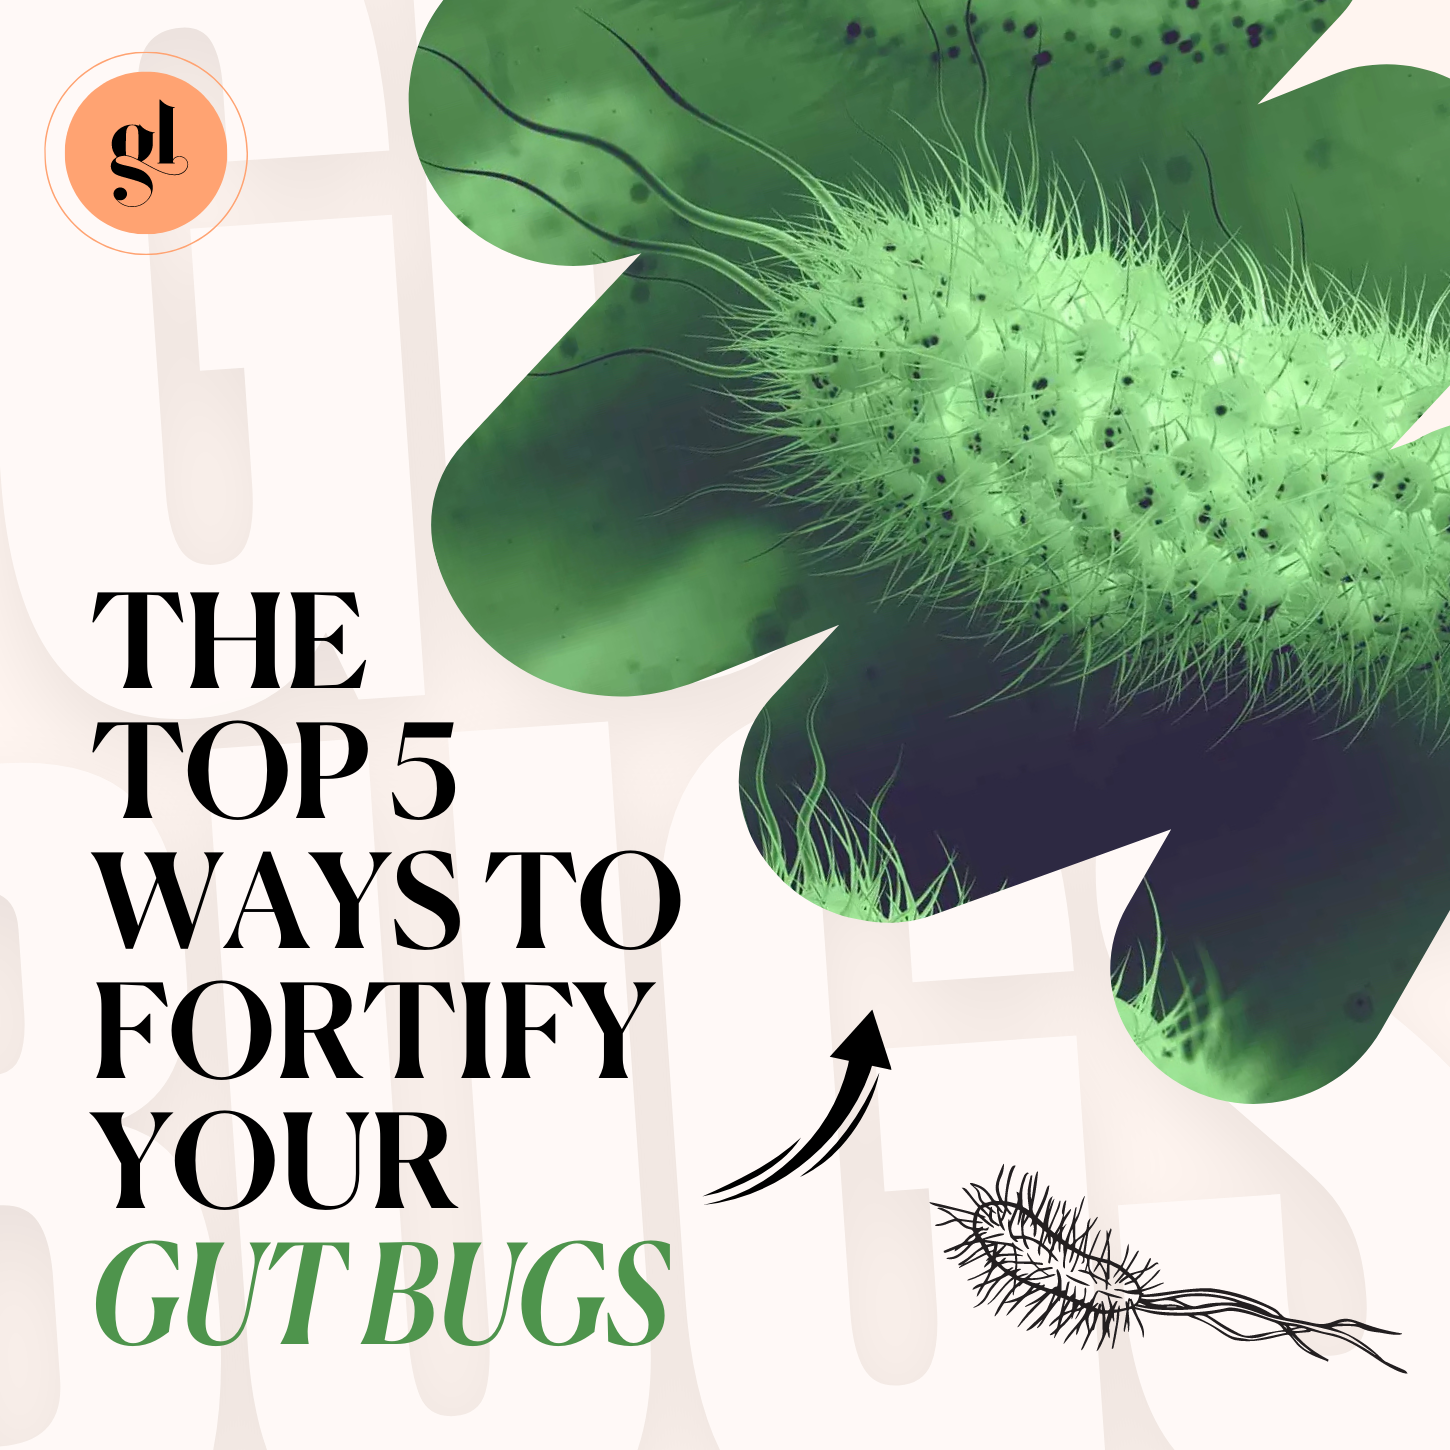 5 Ways to Fortify your Gut Bugs